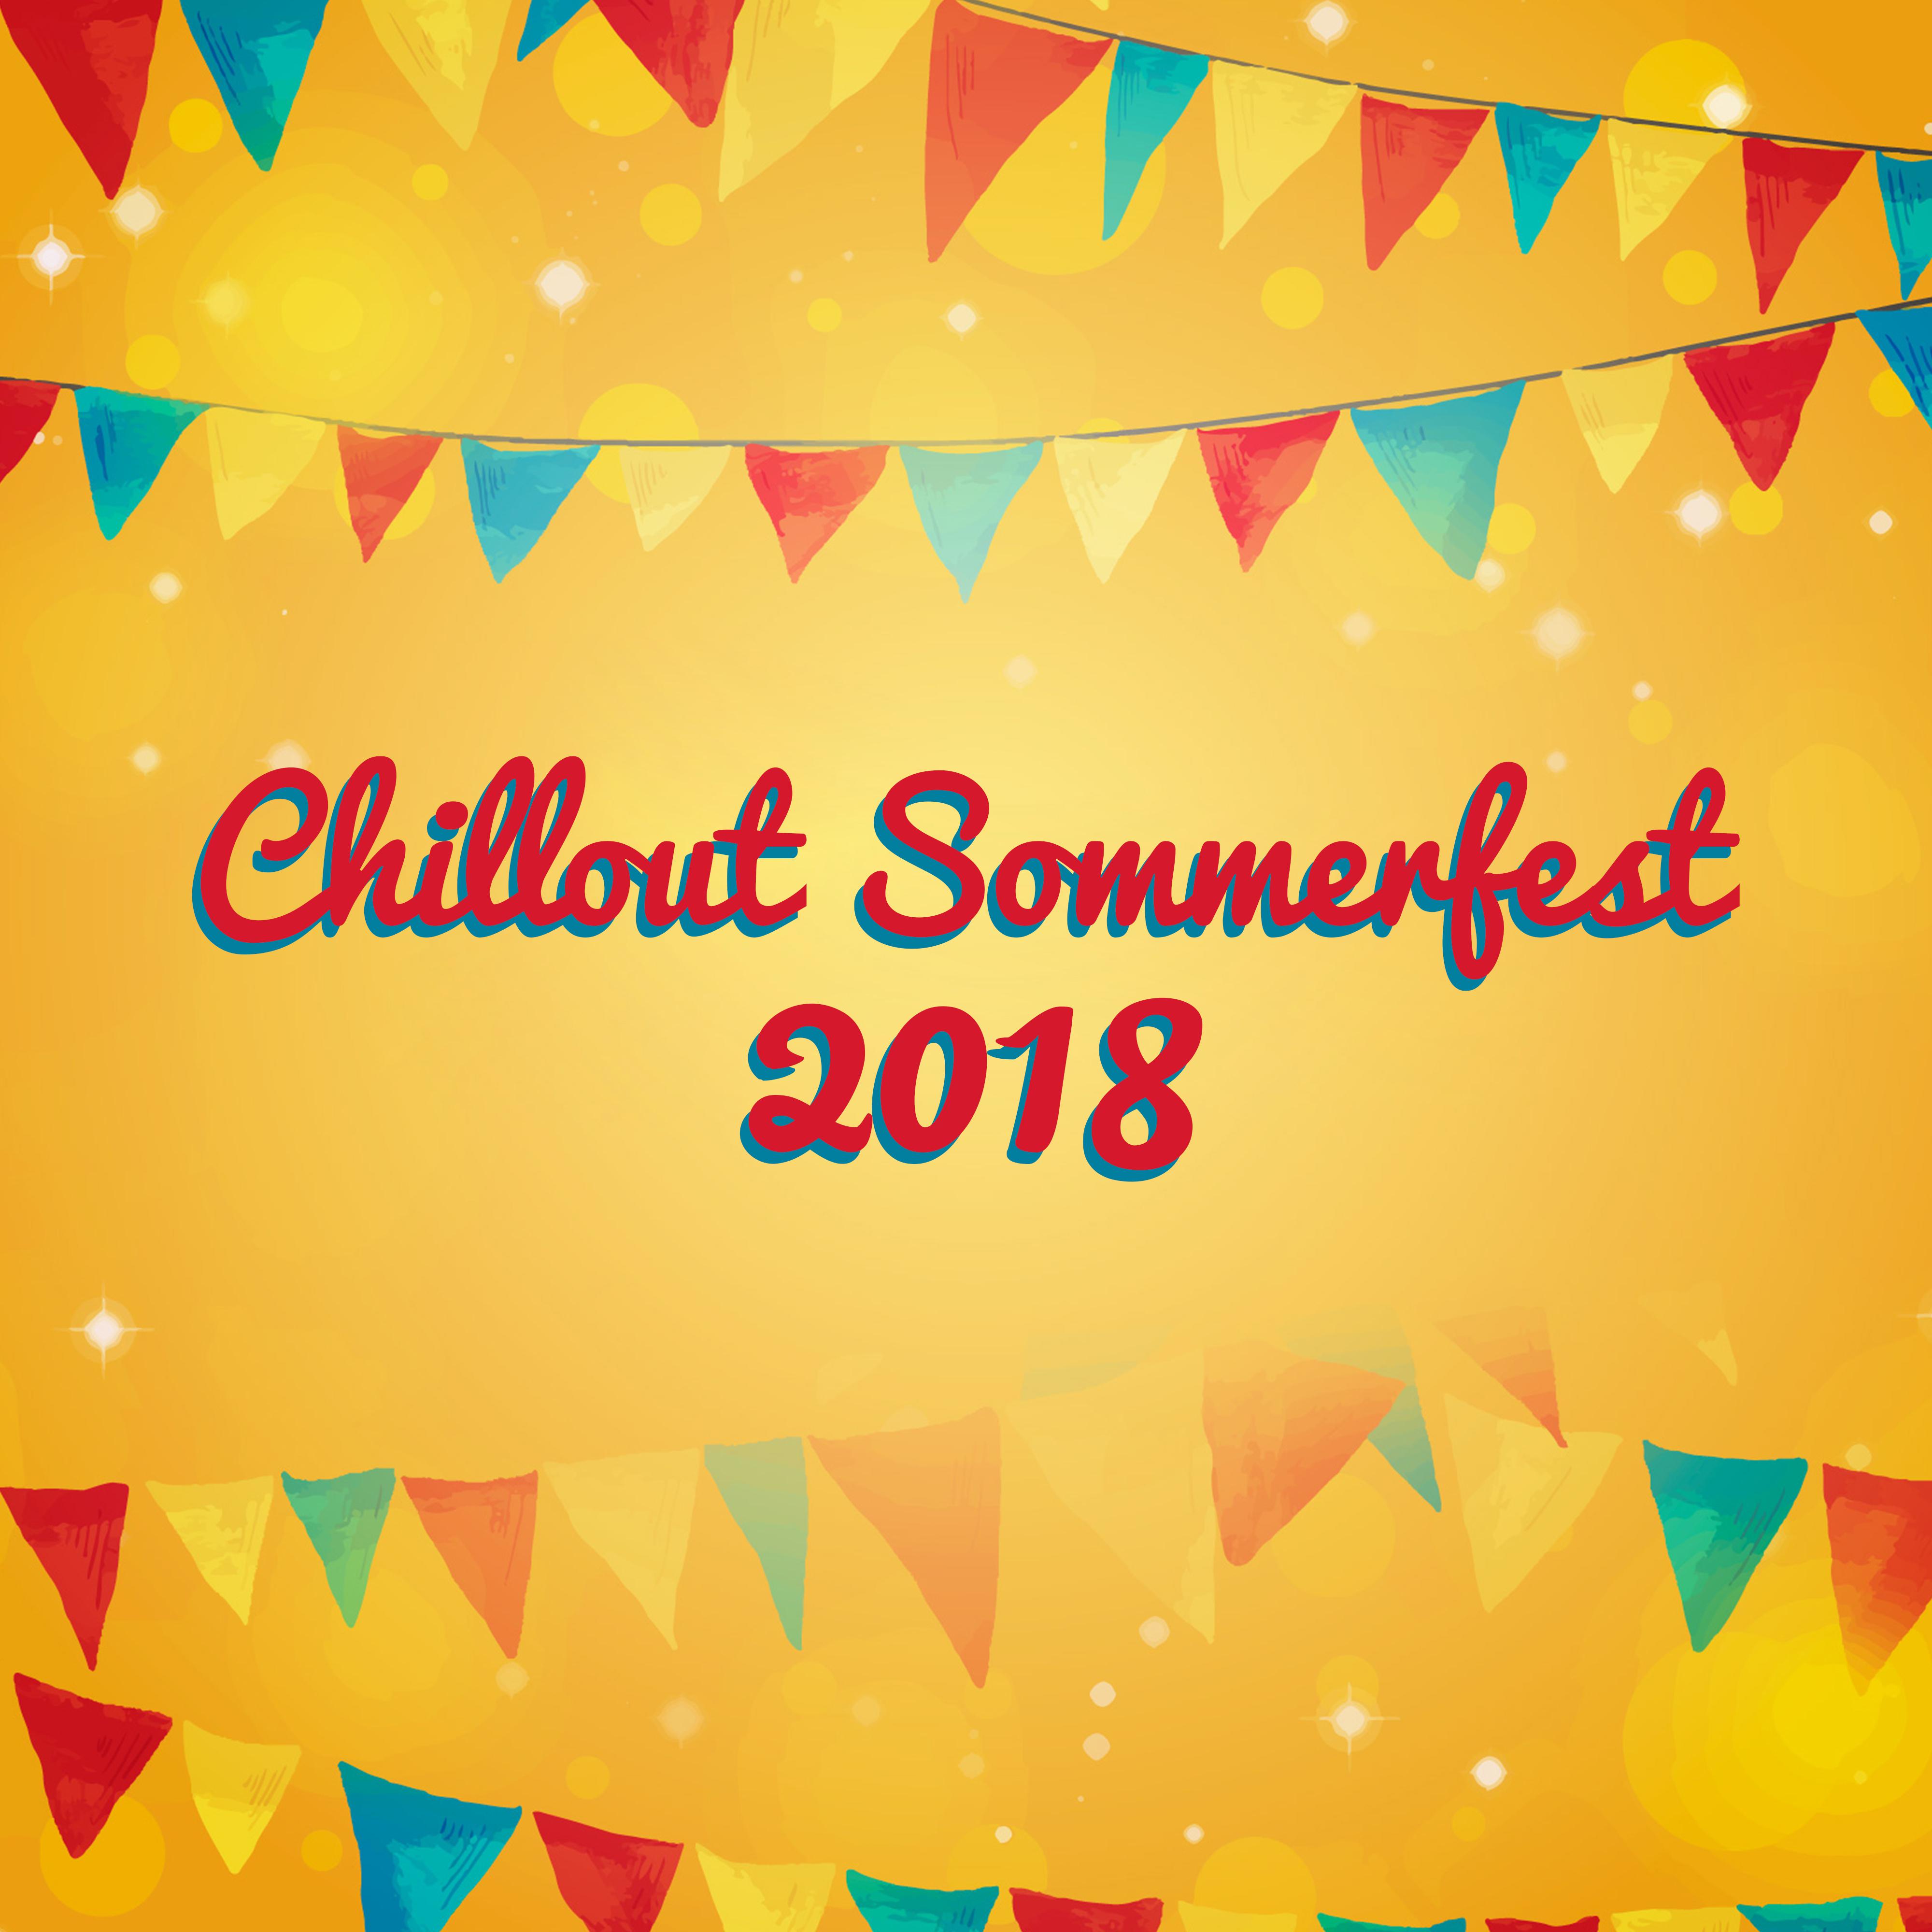 Chillout Sommerfest 2018